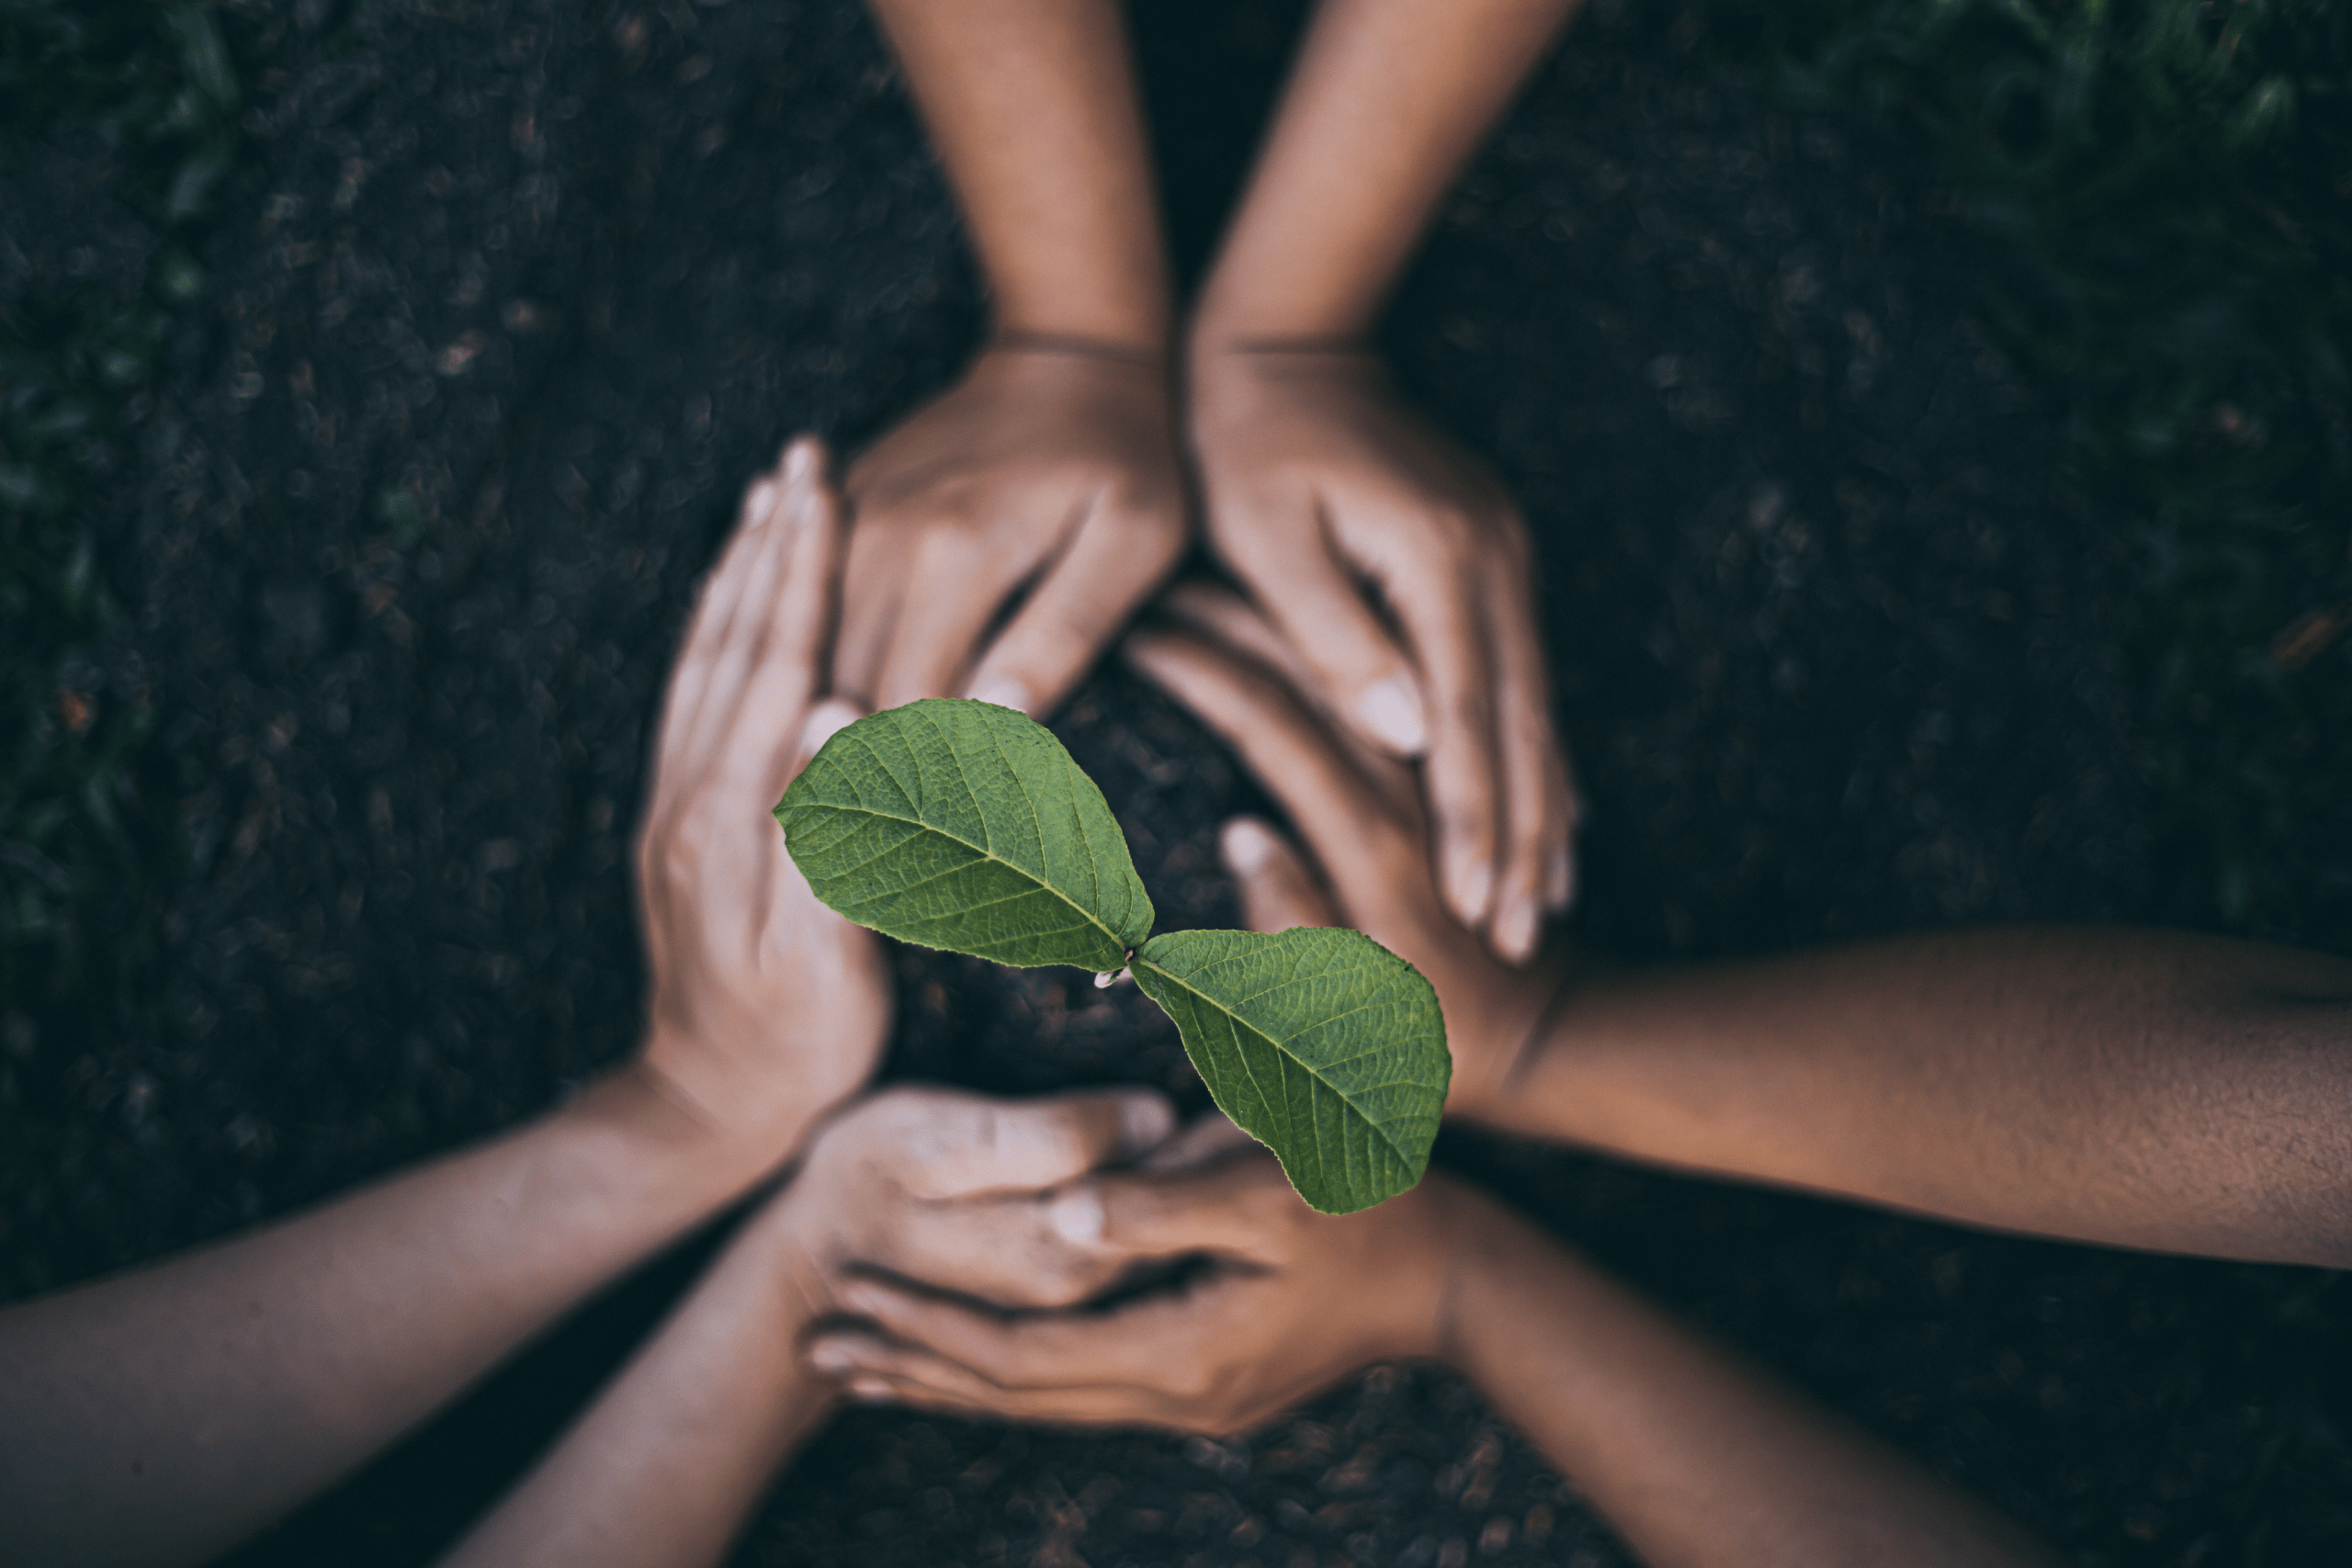 Eco-friendly marketing in your brand